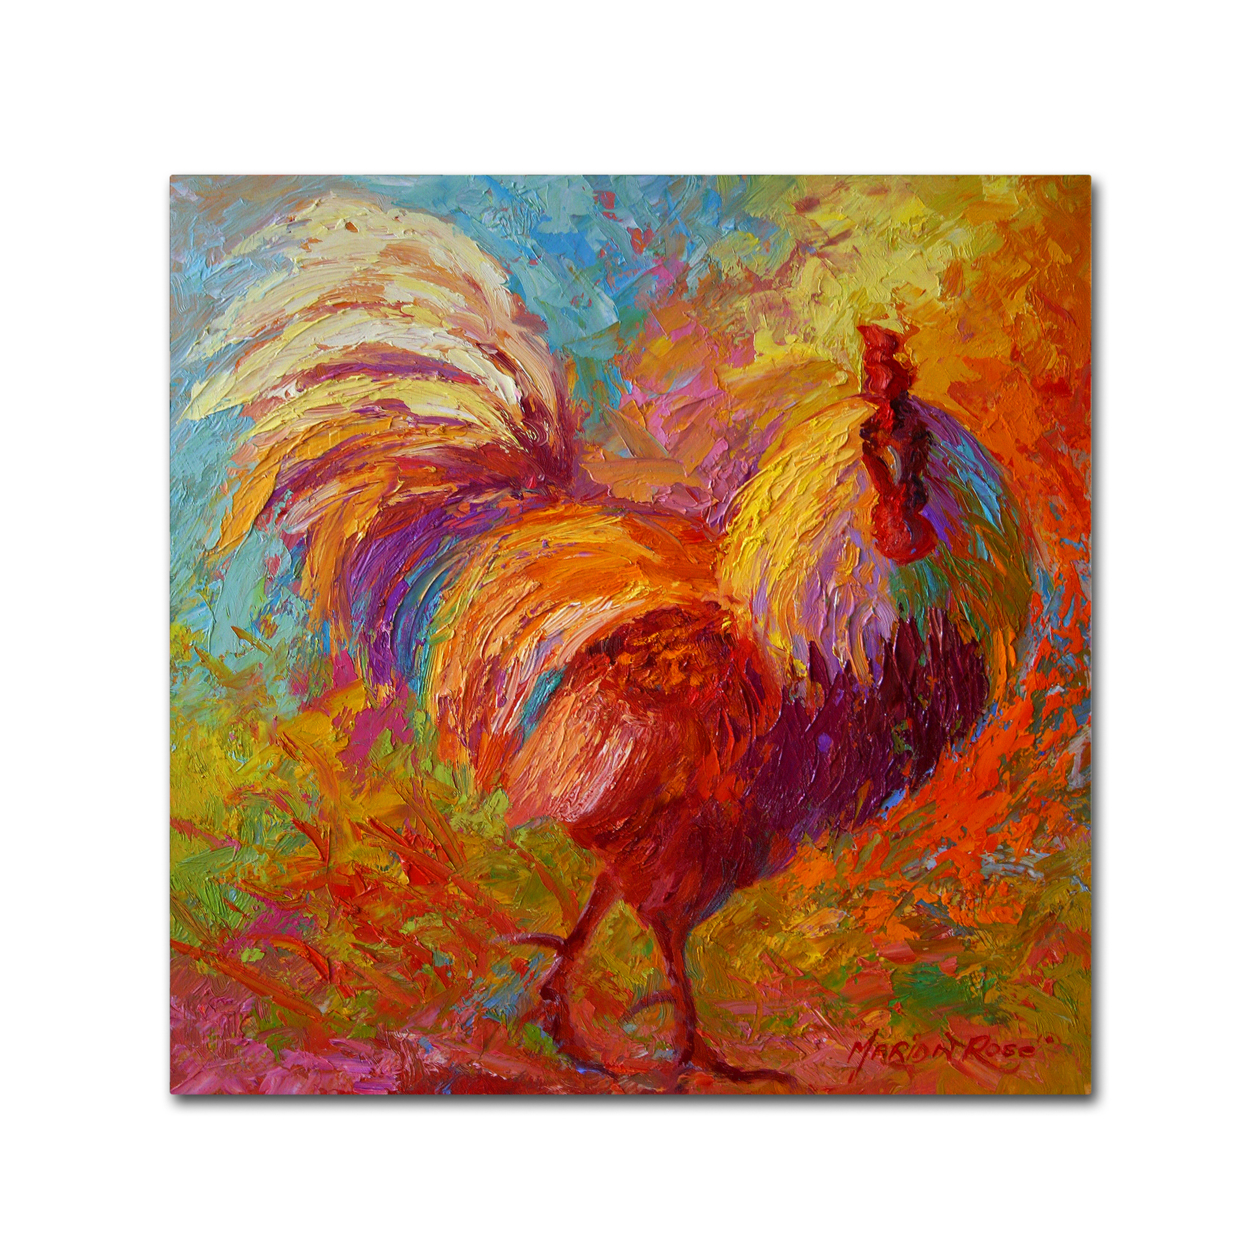 Marion Rose 'Rooster 6' Ready To Hang Canvas Art 24 X 24 Inches Made In USA